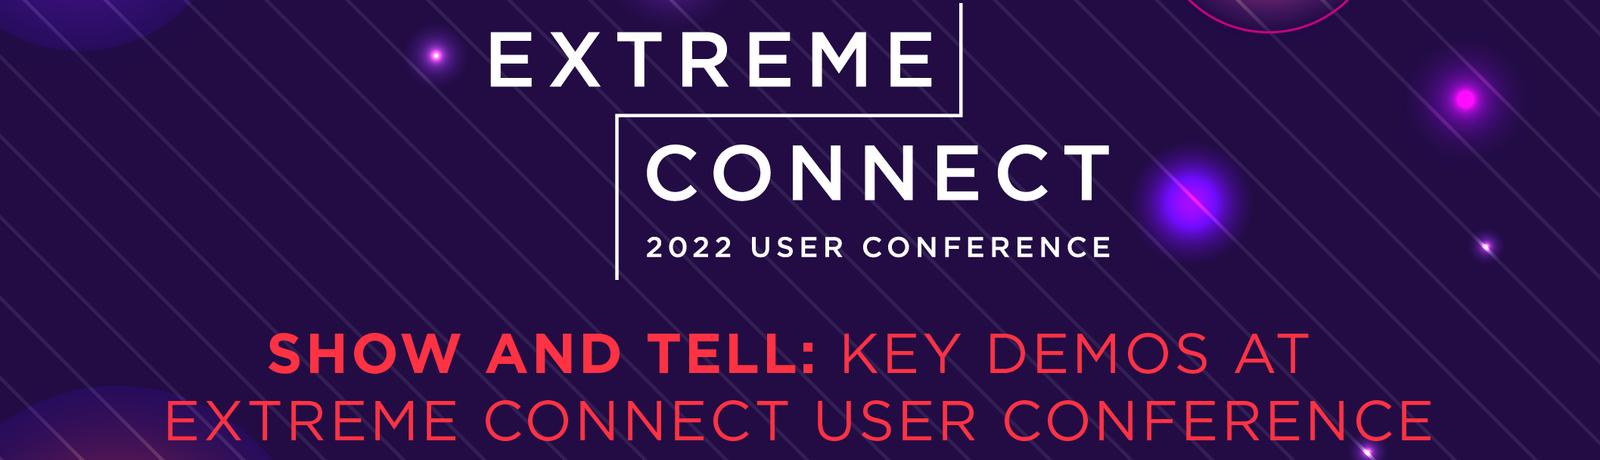 Blog-Show-And-Tell-Key-Demos-At-Extreme-Connect-User-Conference.jpeg